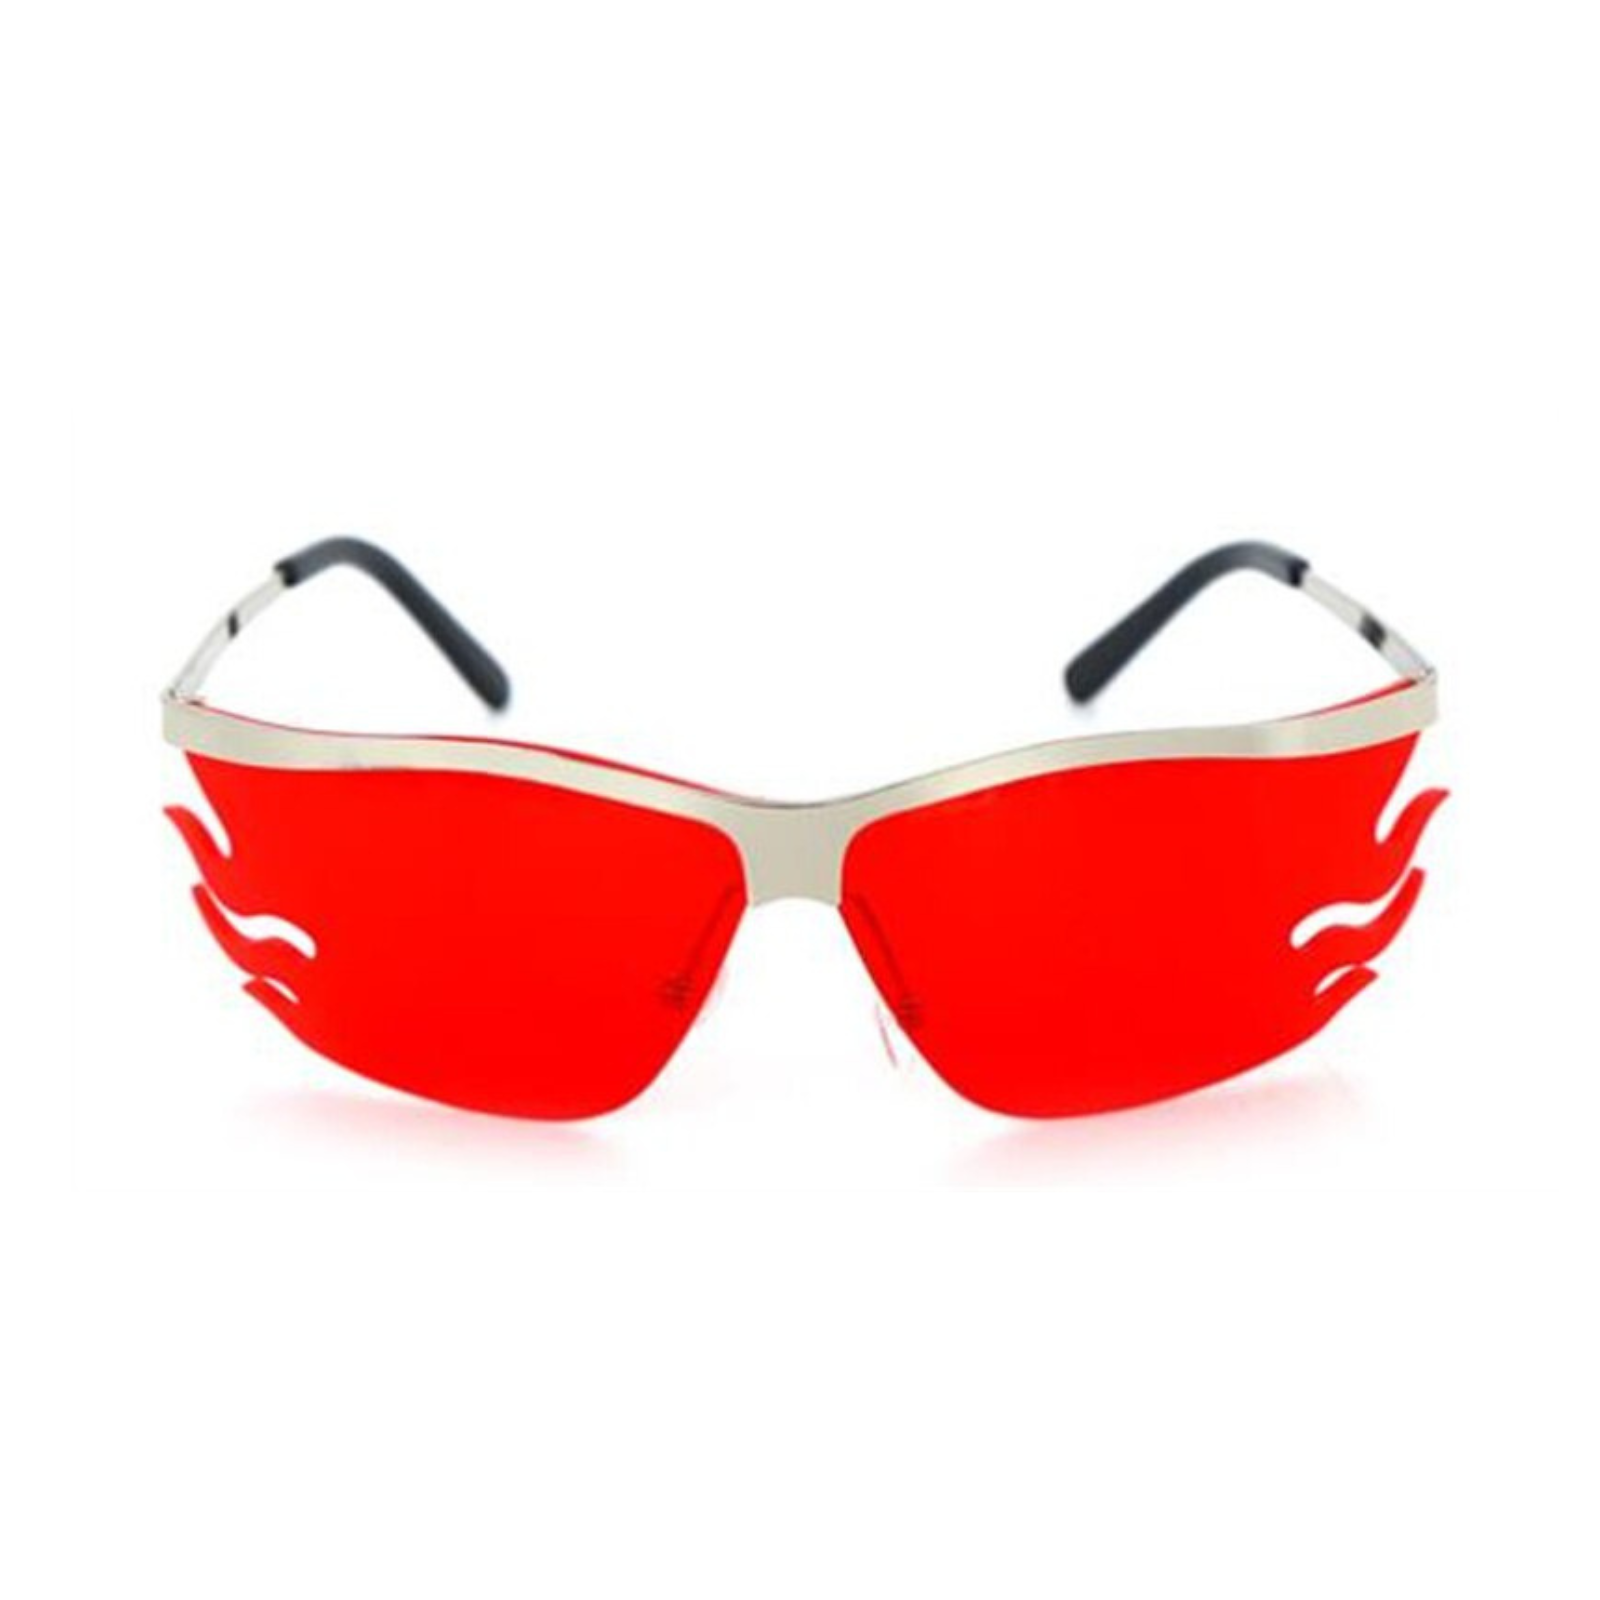 Fire Sunglasses (Red)